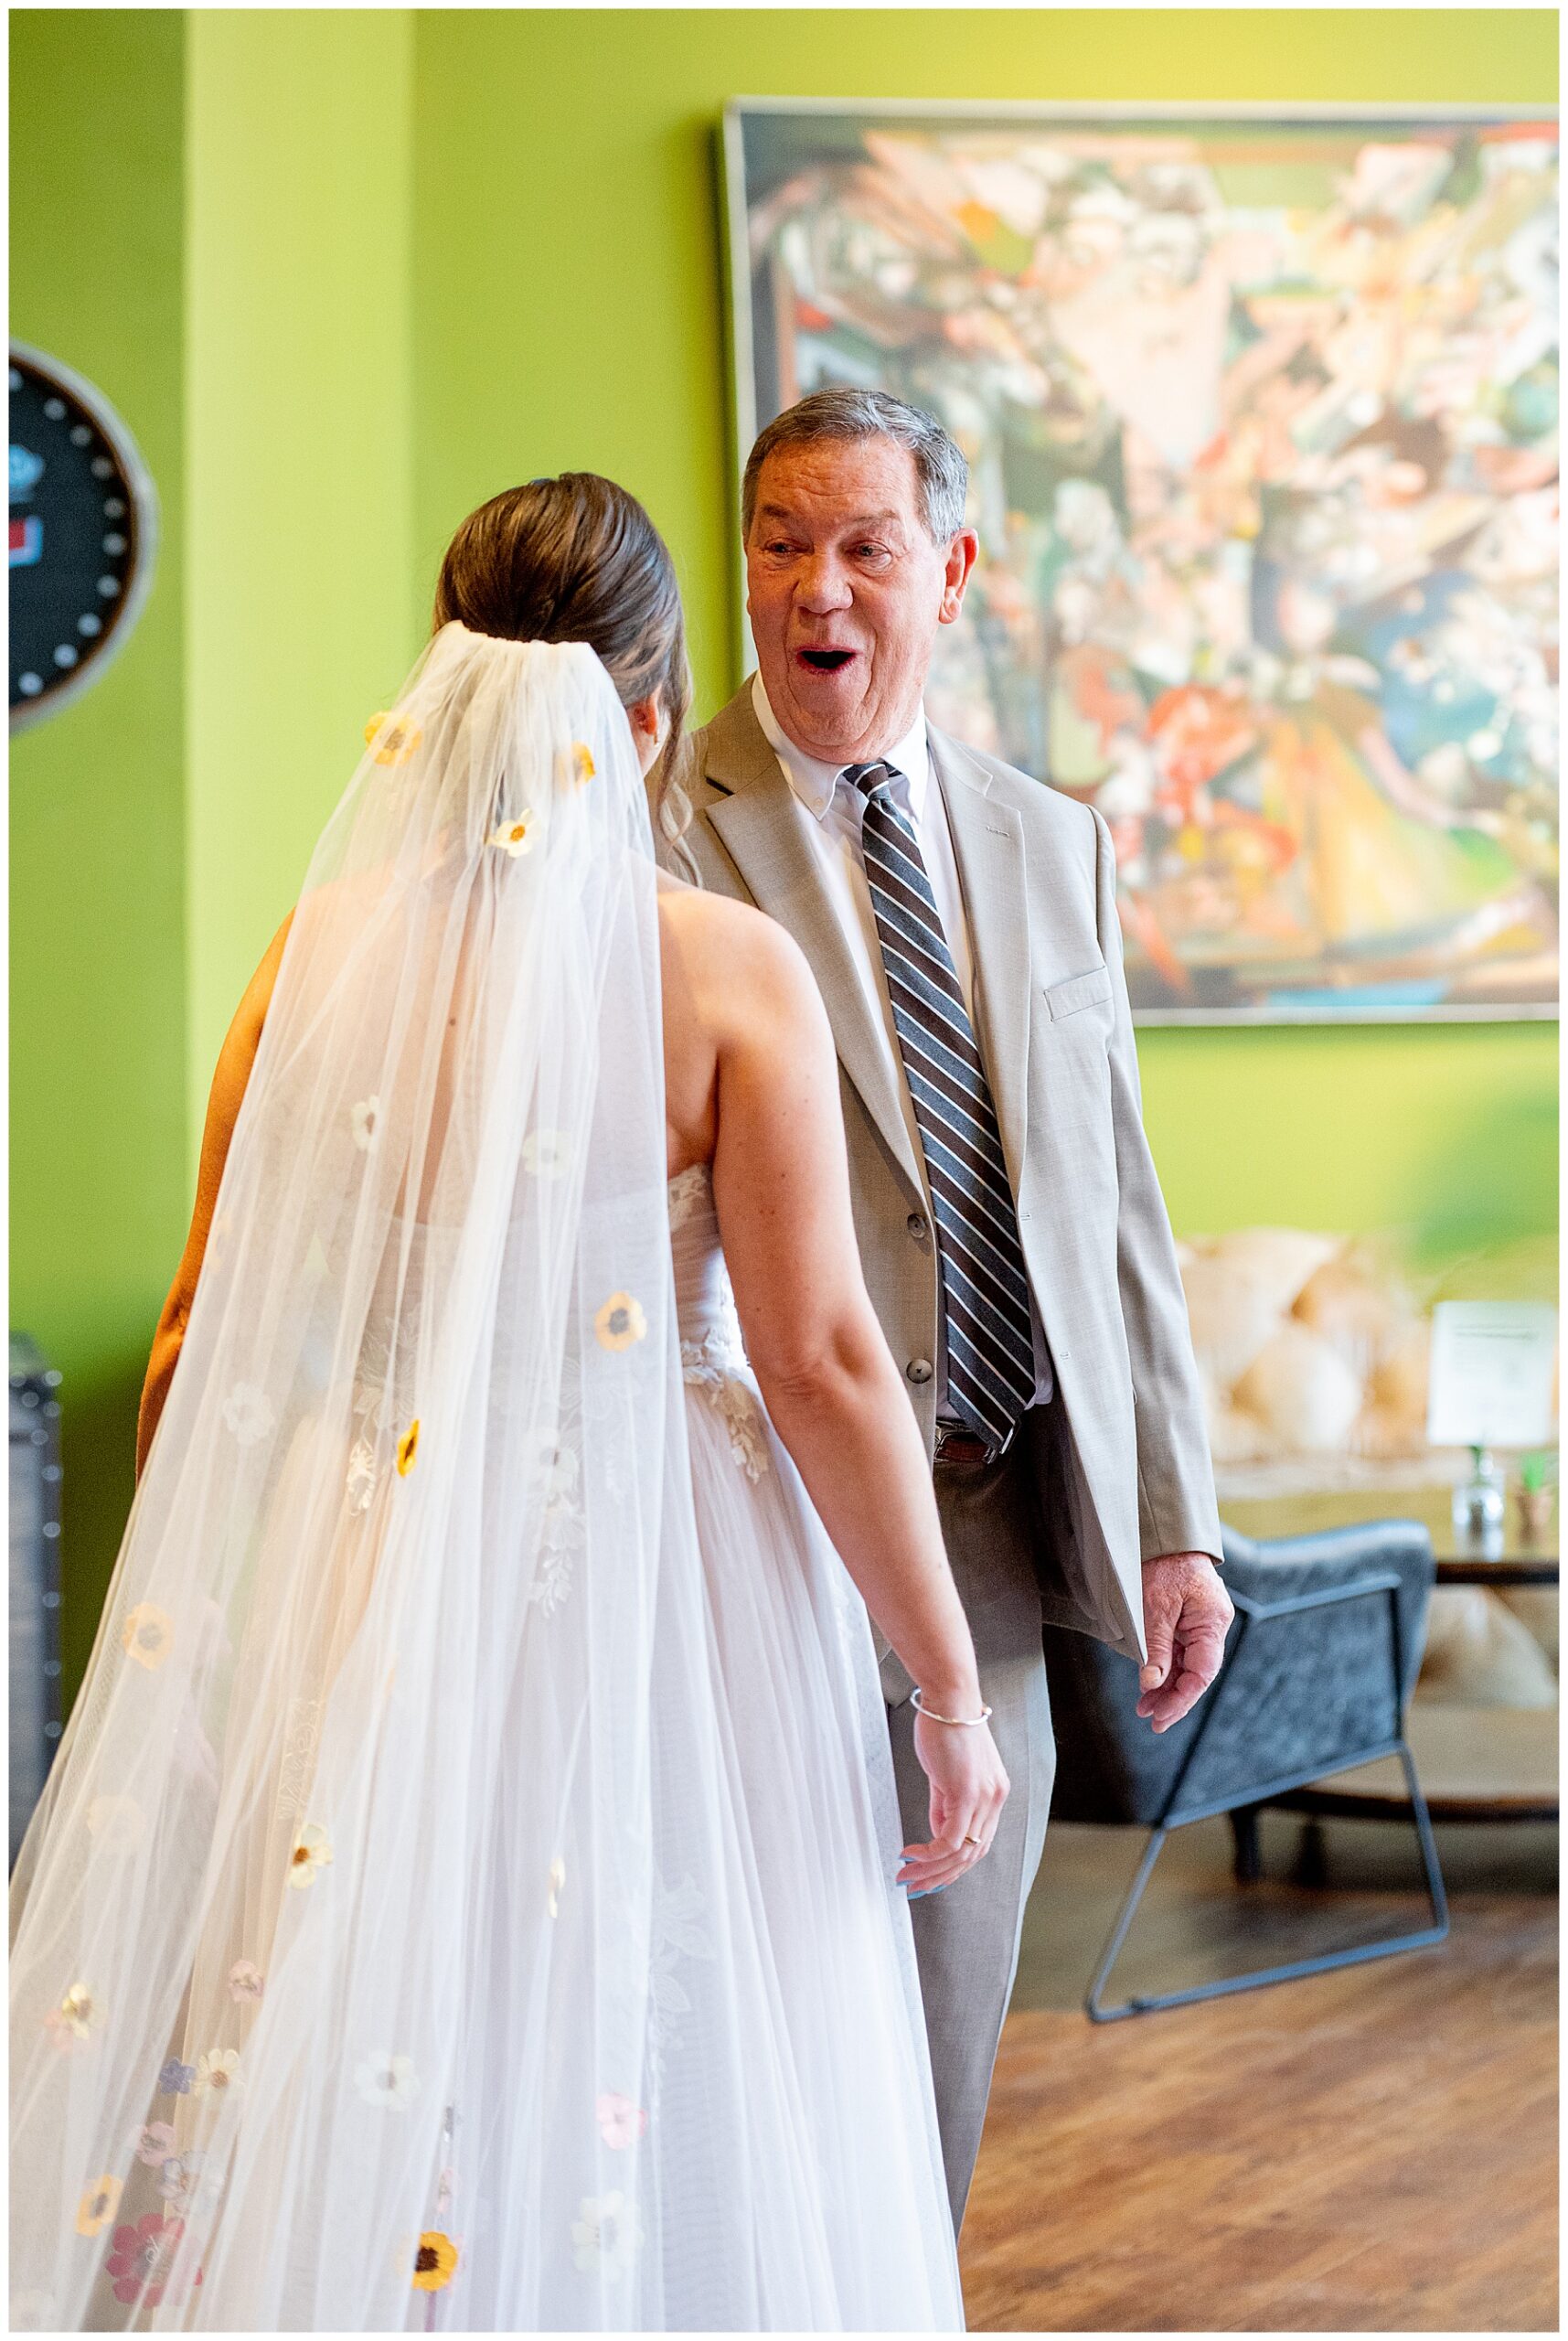 father of the bride turns around to see the bride with a surprised face